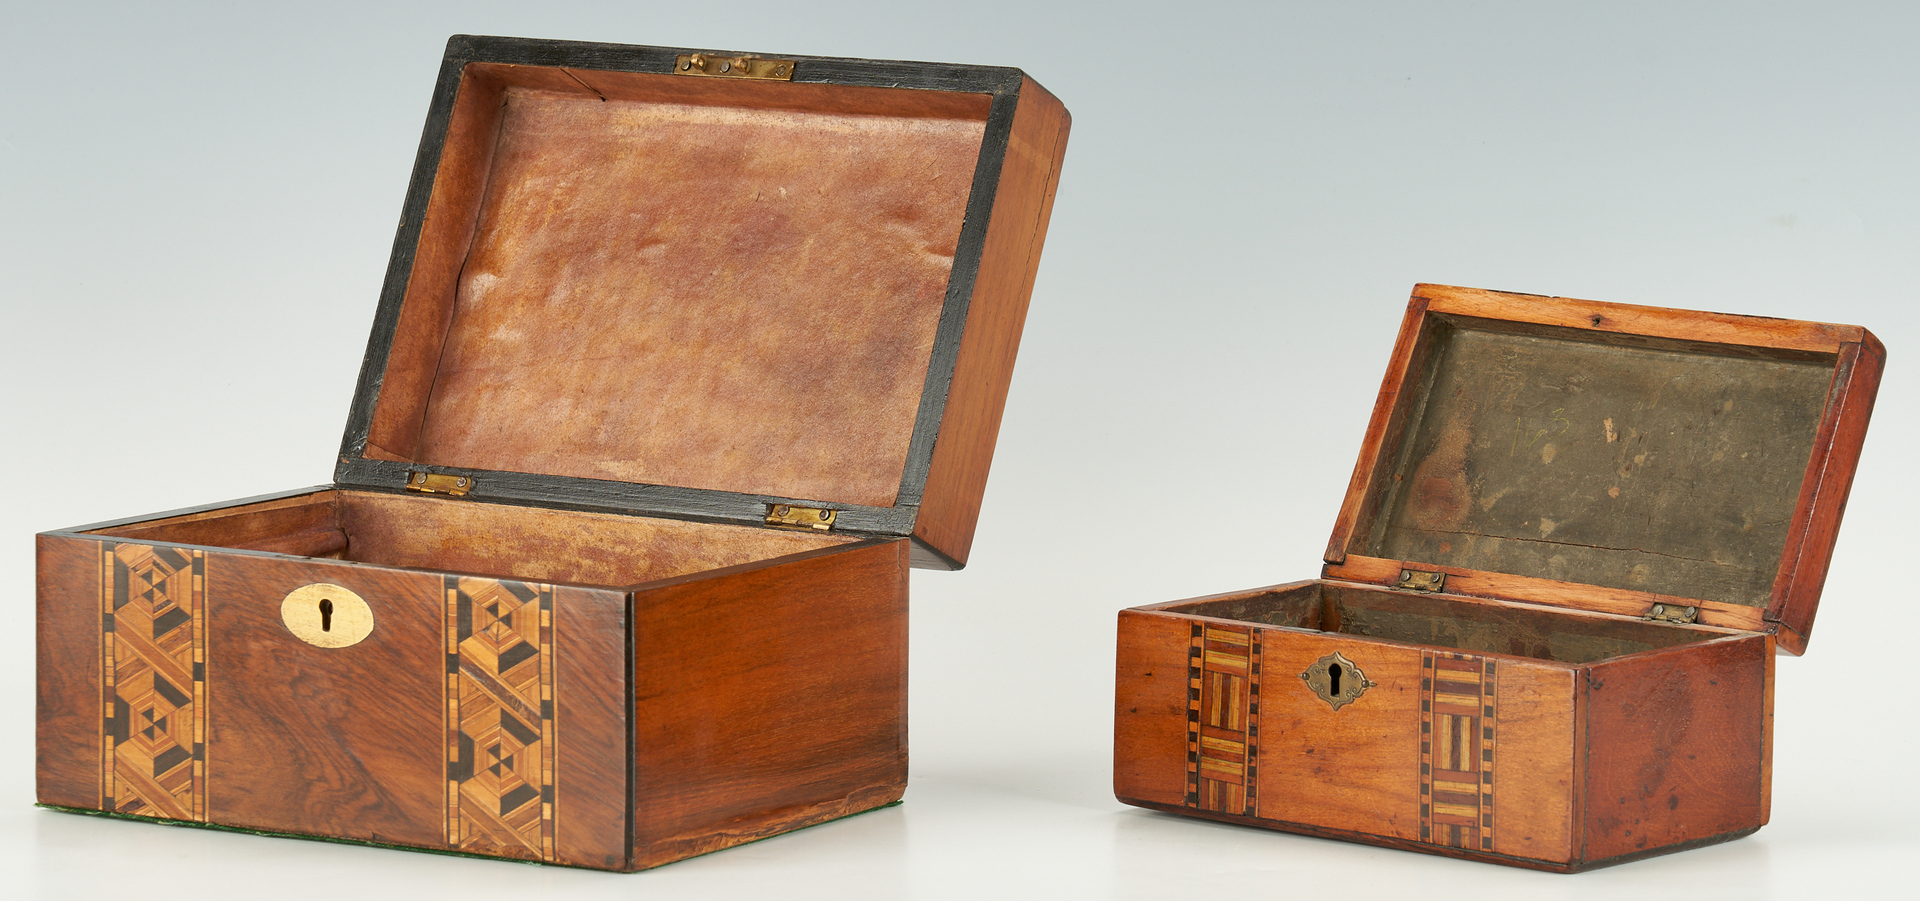 Lot 171: 4 19th Cent. Wooden Boxes, incl. Parquetry